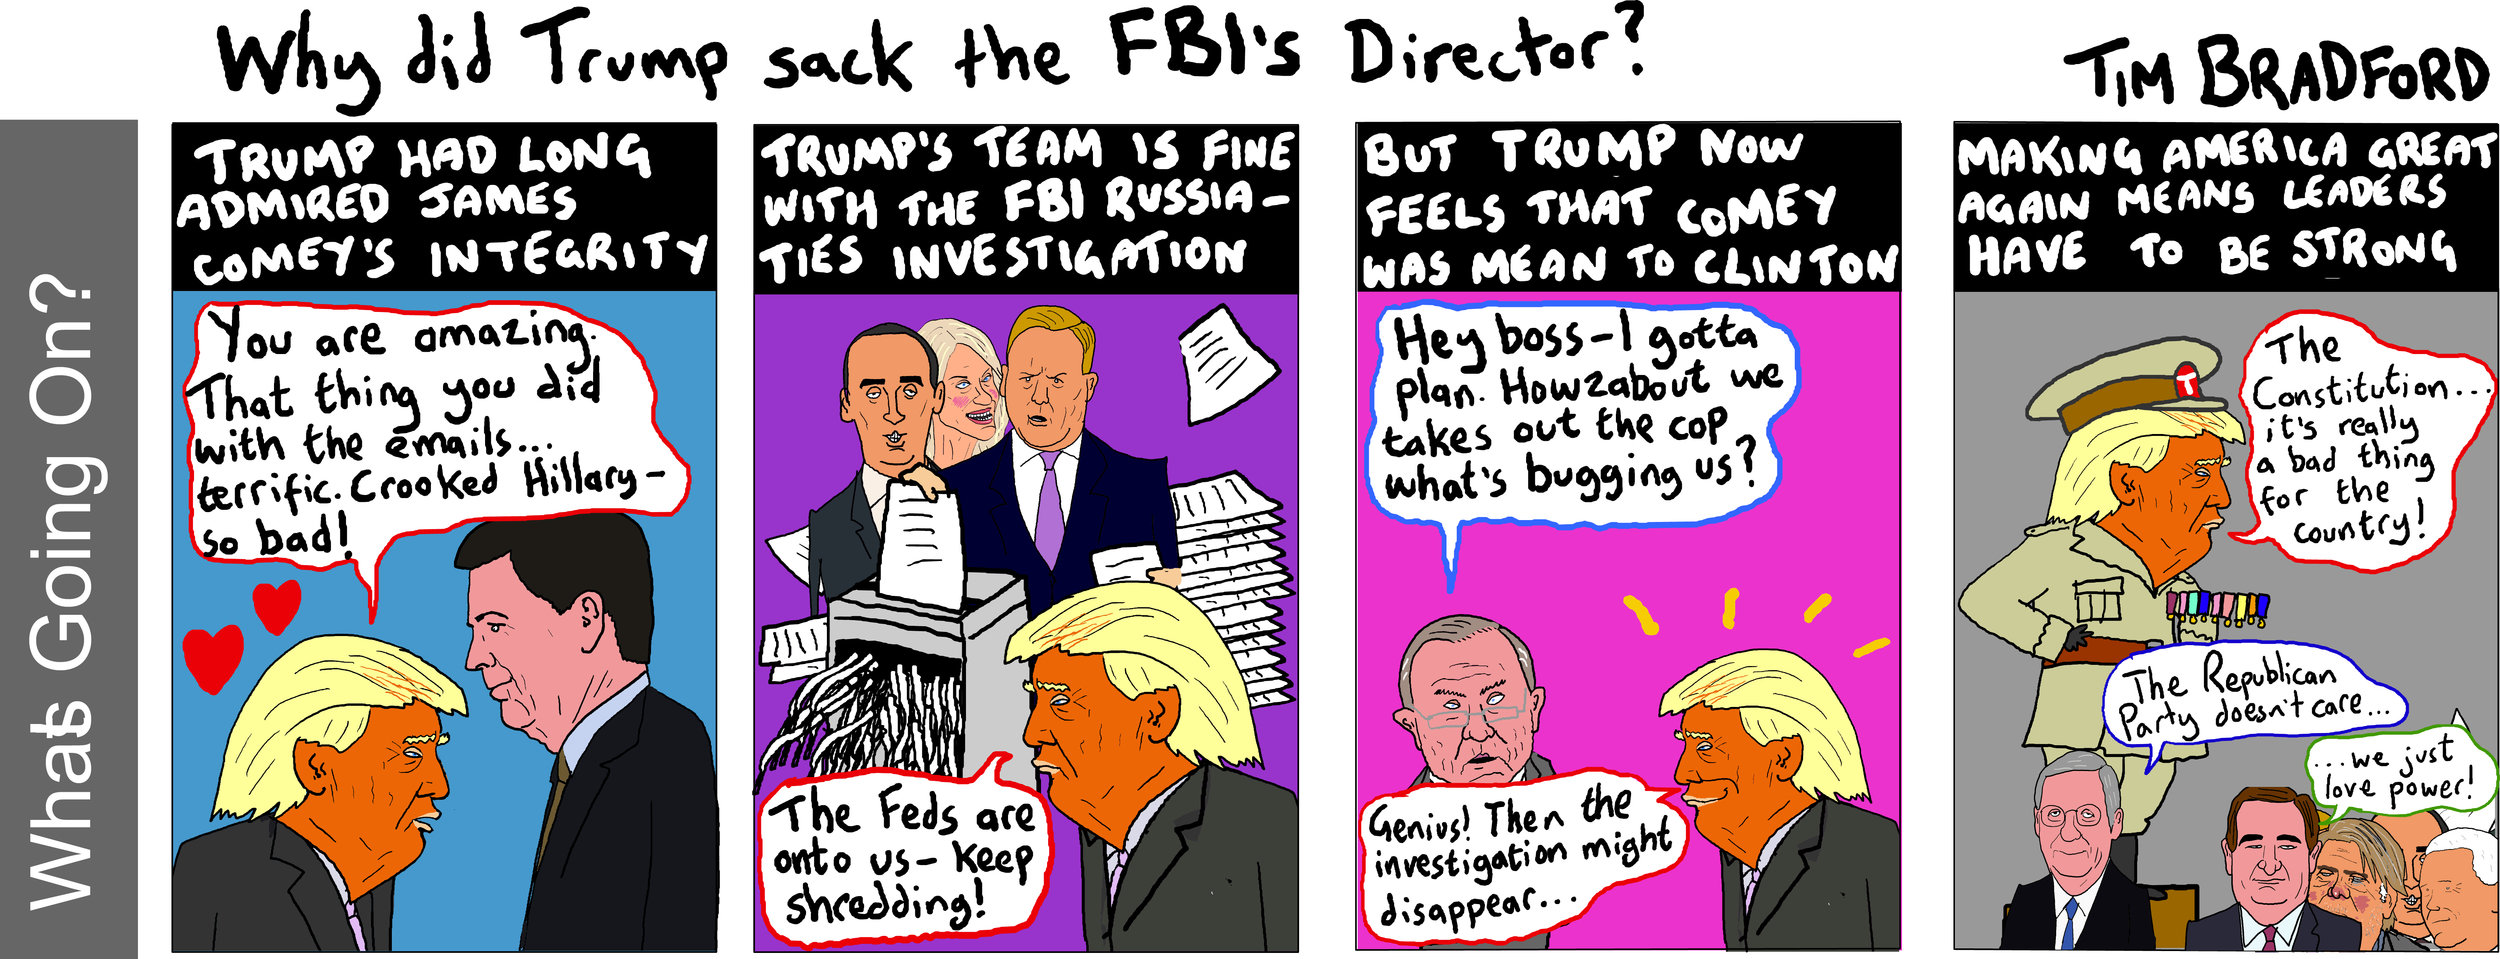 Copy of Why did Trump sack the FBI Director? - 12/05/17